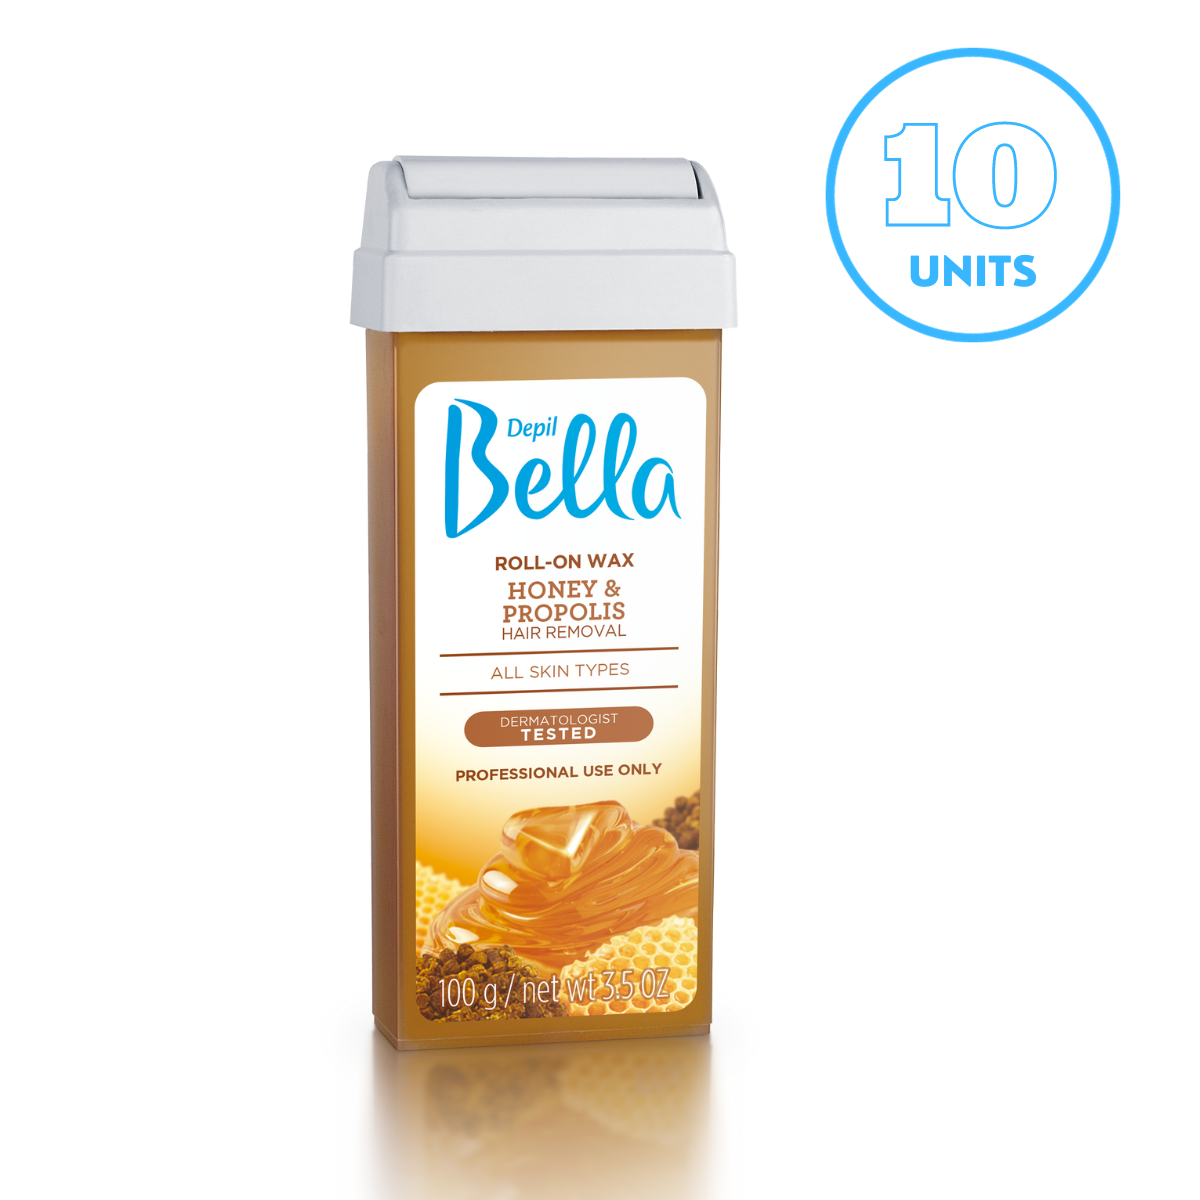 Depil Bella Honey with Propolis Roll-On Depilatory Wax, 3.52oz (10 Units Offer)